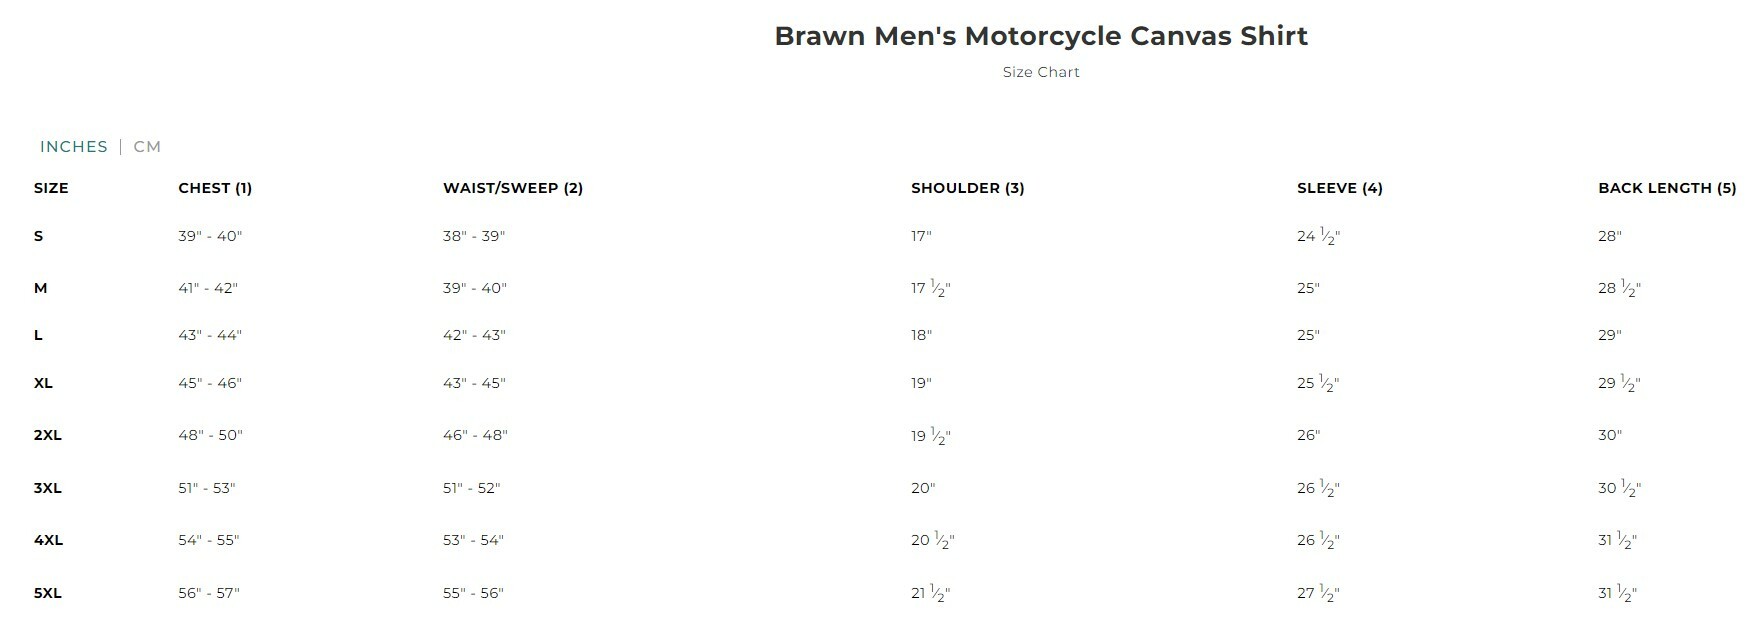 Size chart for Brawn, men's duck canvas motorcycle shirt.